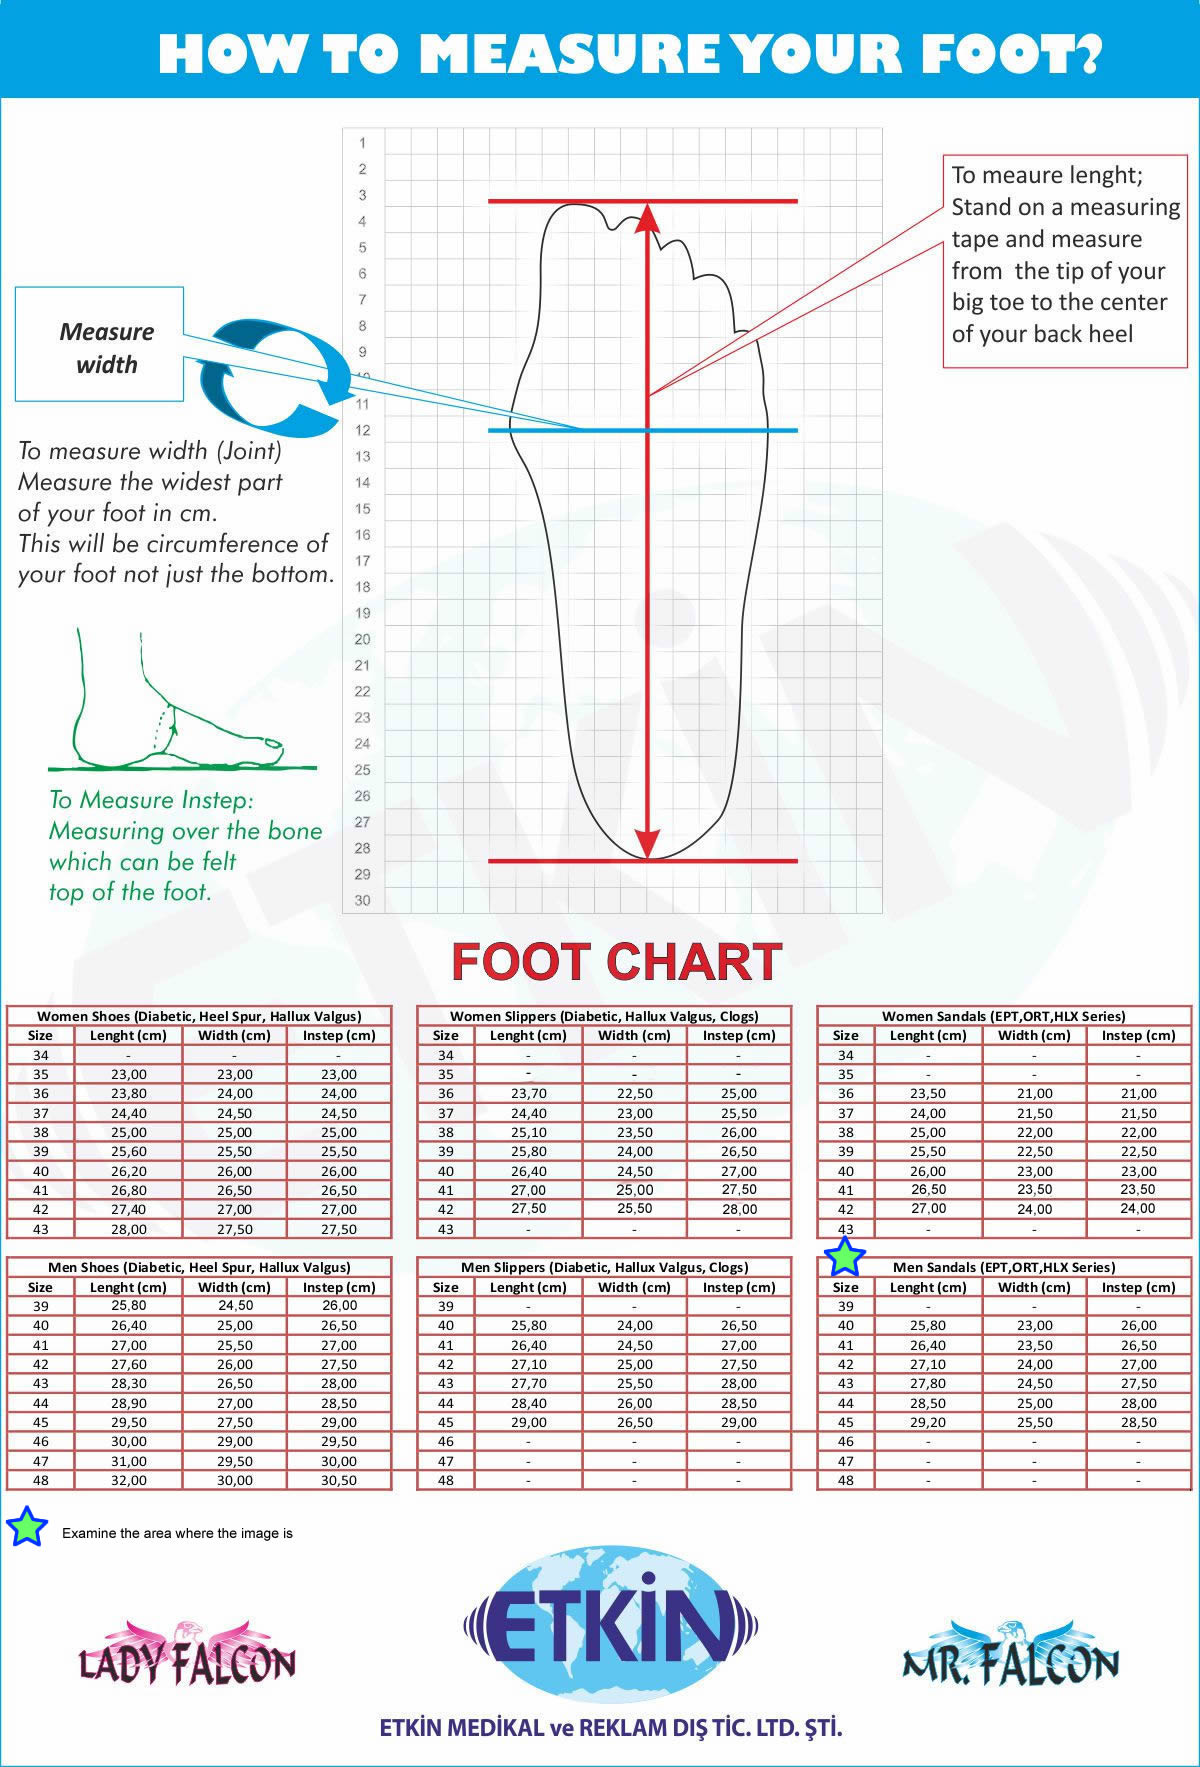 Men's Sandals For Bunions and Heel spurs size chart